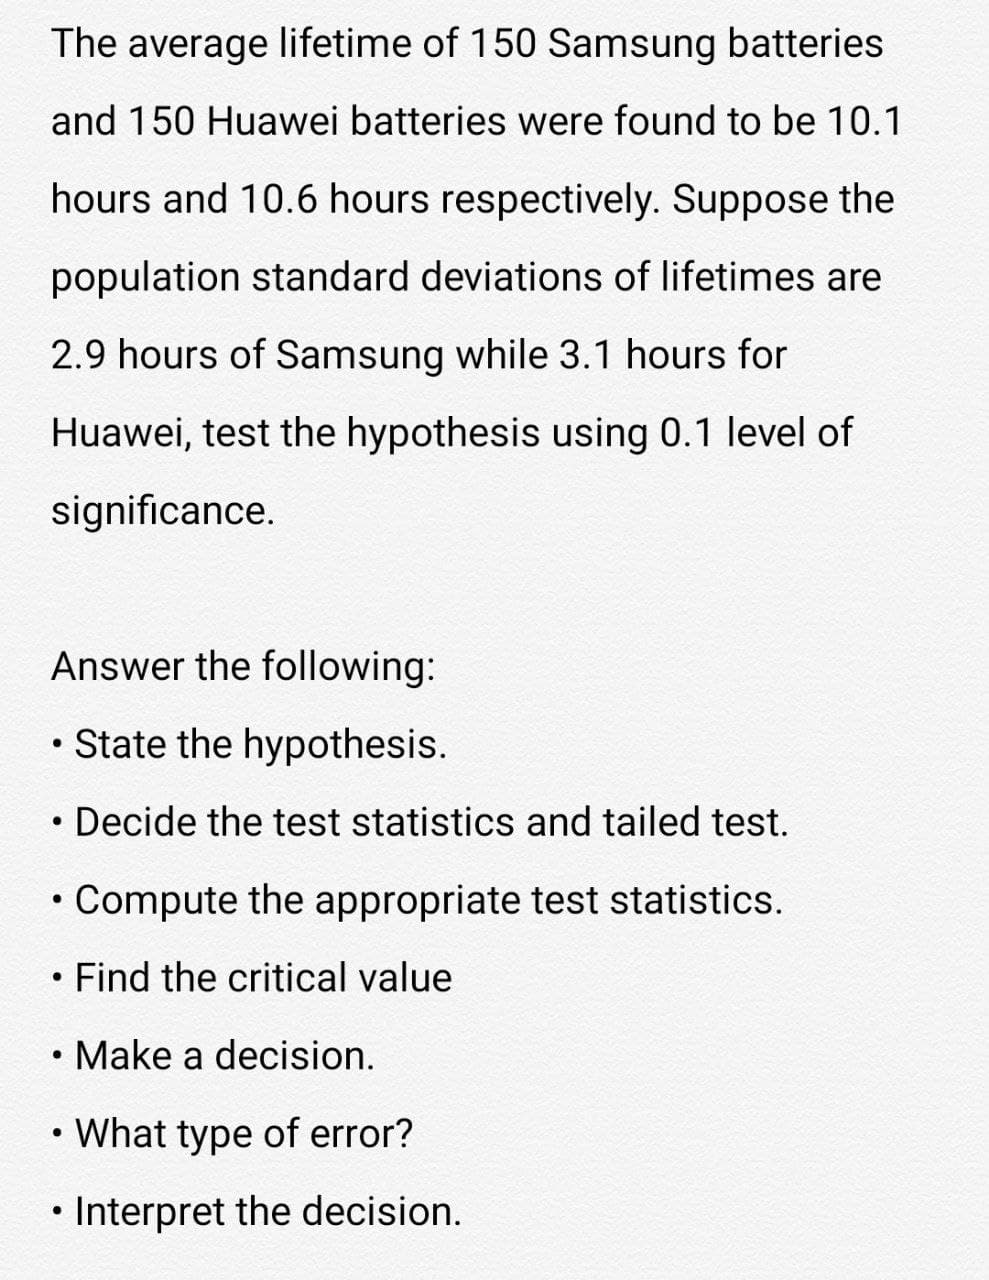 The average lifetime of 150 Samsung batteries
and 150 Huawei batteries were found to be 10.1
hours and 10.6 hours respectively. Suppose the
population standard deviations of lifetimes are
2.9 hours of Samsung while 3.1 hours for
Huawei, test the hypothesis using 0.1 level of
significance.
Answer the following:
• State the hypothesis.
• Decide the test statistics and tailed test.
Compute the appropriate test statistics.
Find the critical value
• Make a decision.
• What type of error?
Interpret the decision.
